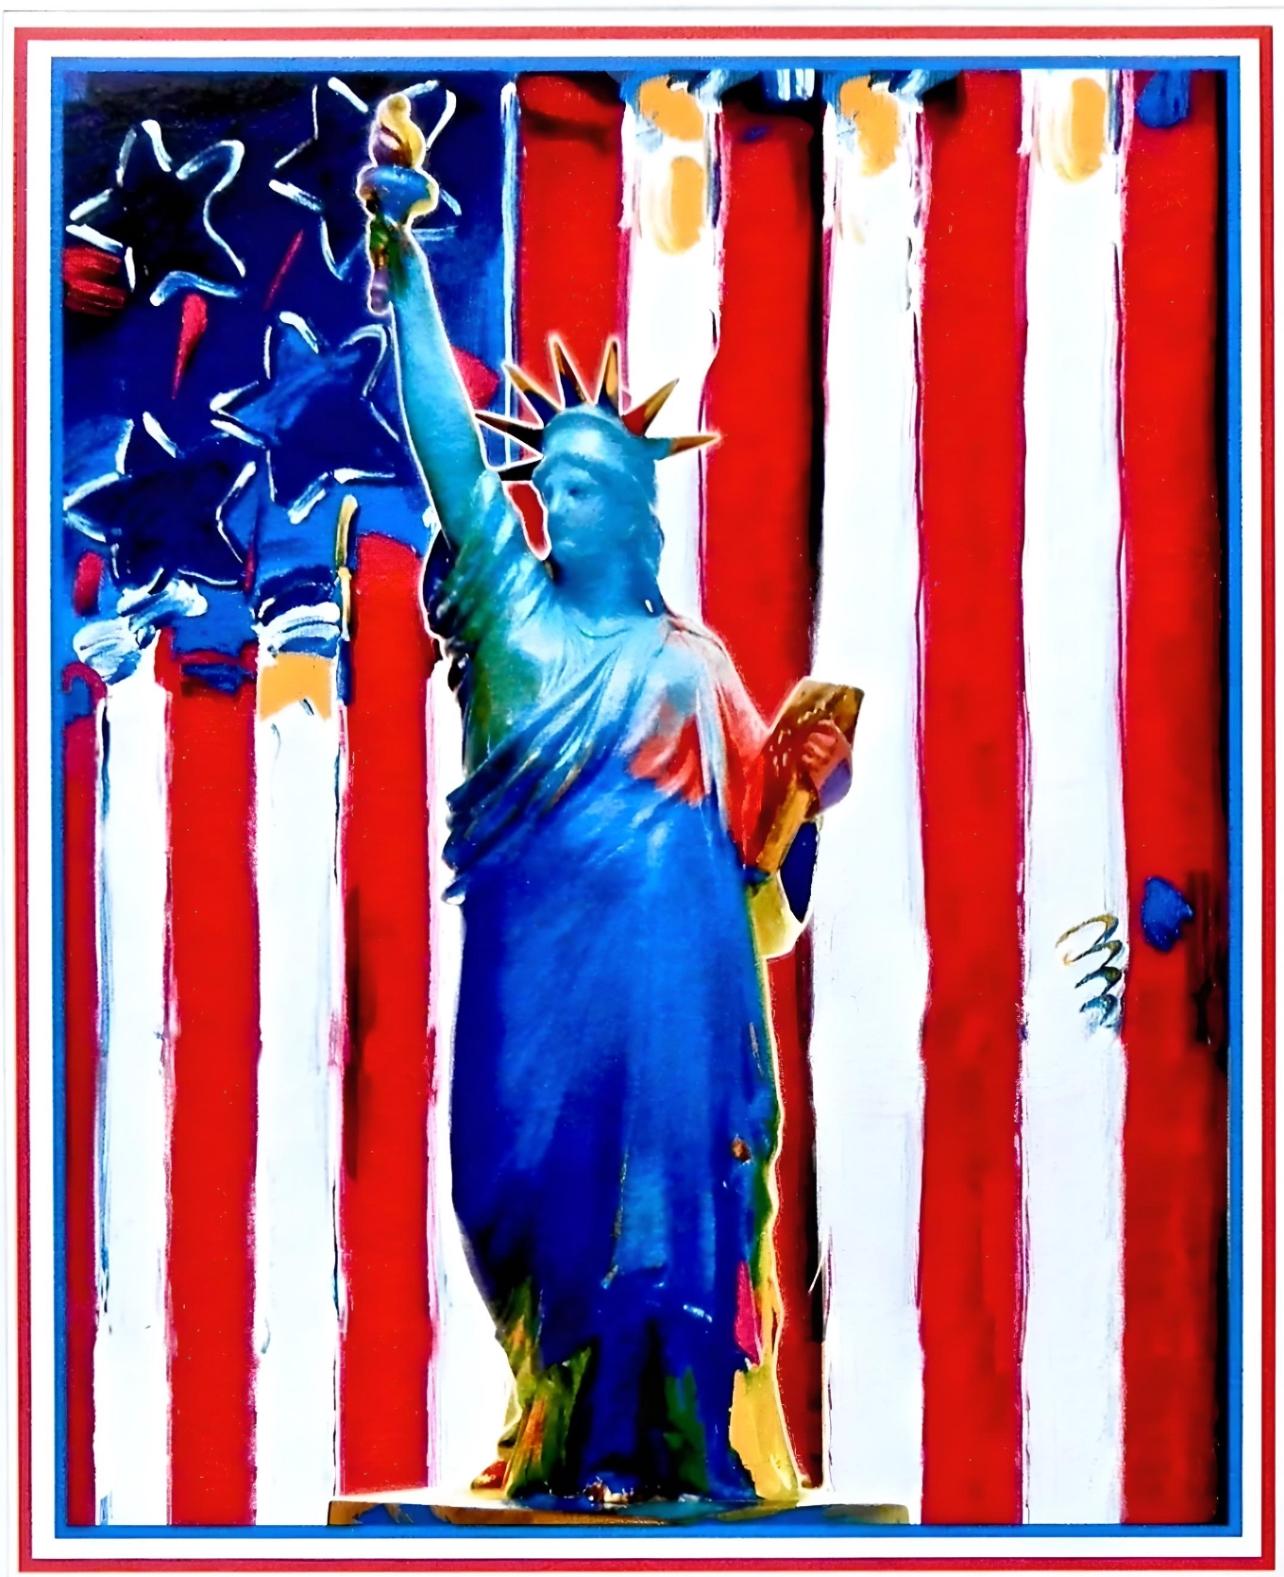 Artist: Peter Max (1937)
Title: United We Stand
Year: 2002
Edition: 107/300, plus proofs
Medium: Lithograph on Lustro Saxony paper
Size: 12.5 x 9 inches
Condition: Excellent
Inscription: Signed and numbered by the artist.
Notes: Published by Via